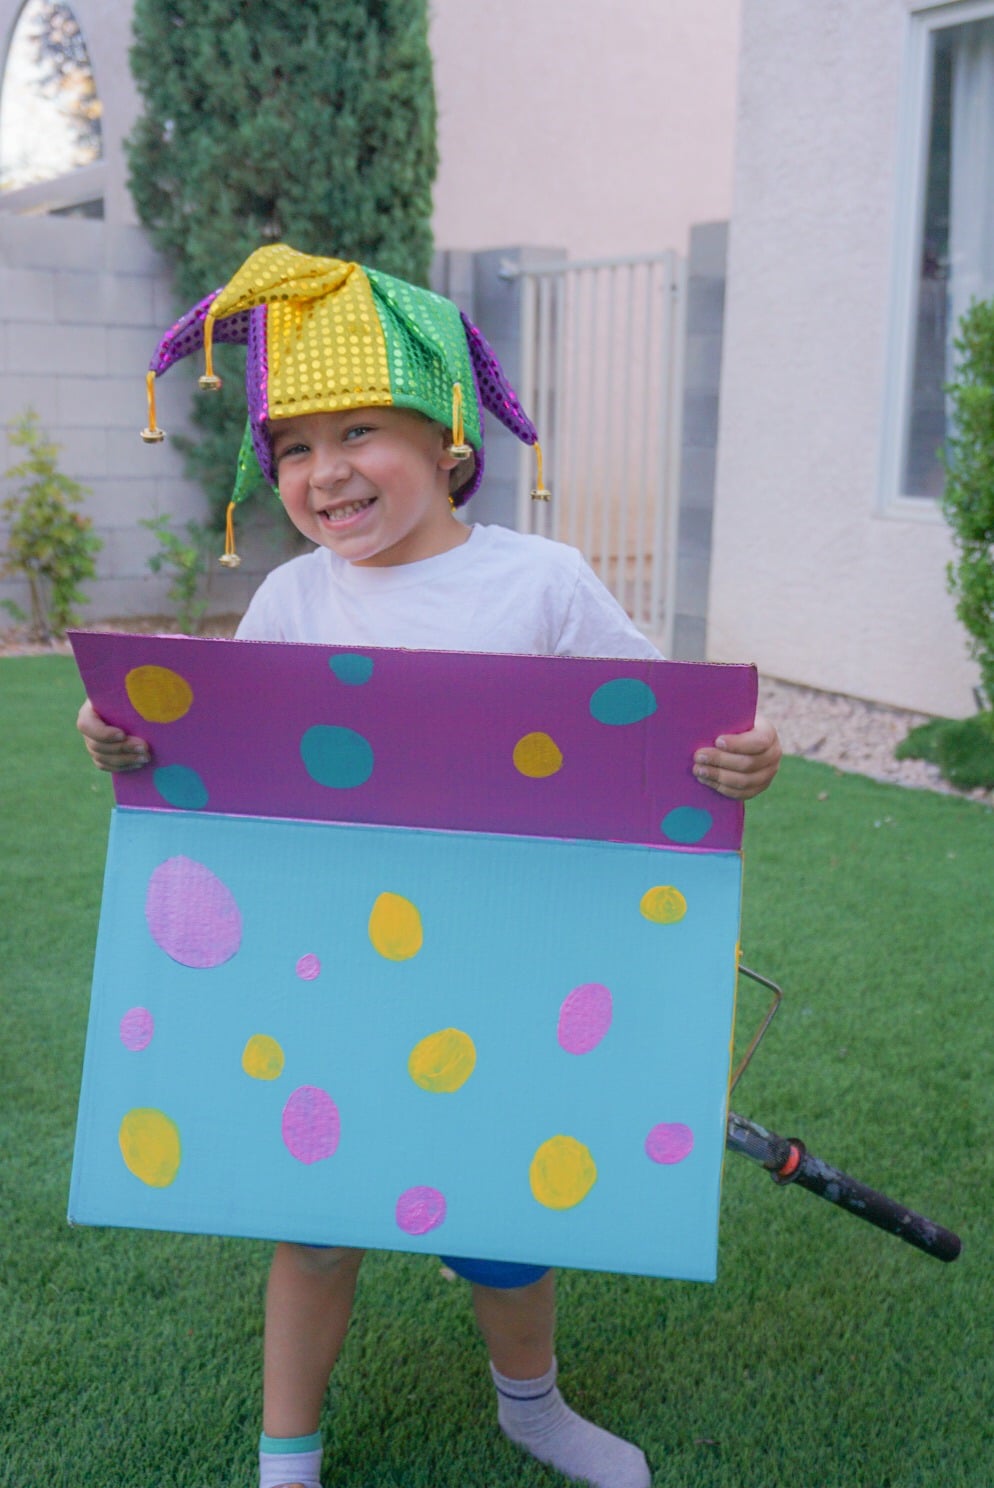 A smiling child stands outside wearing a Jack-in-the-Box creative Halloween costume made out of a cardboard box painted with colorful blue, purple, and yellow polka dots. The child also wears a white t-shirt and a whimsical purple, yellow, and green jester-style hat.